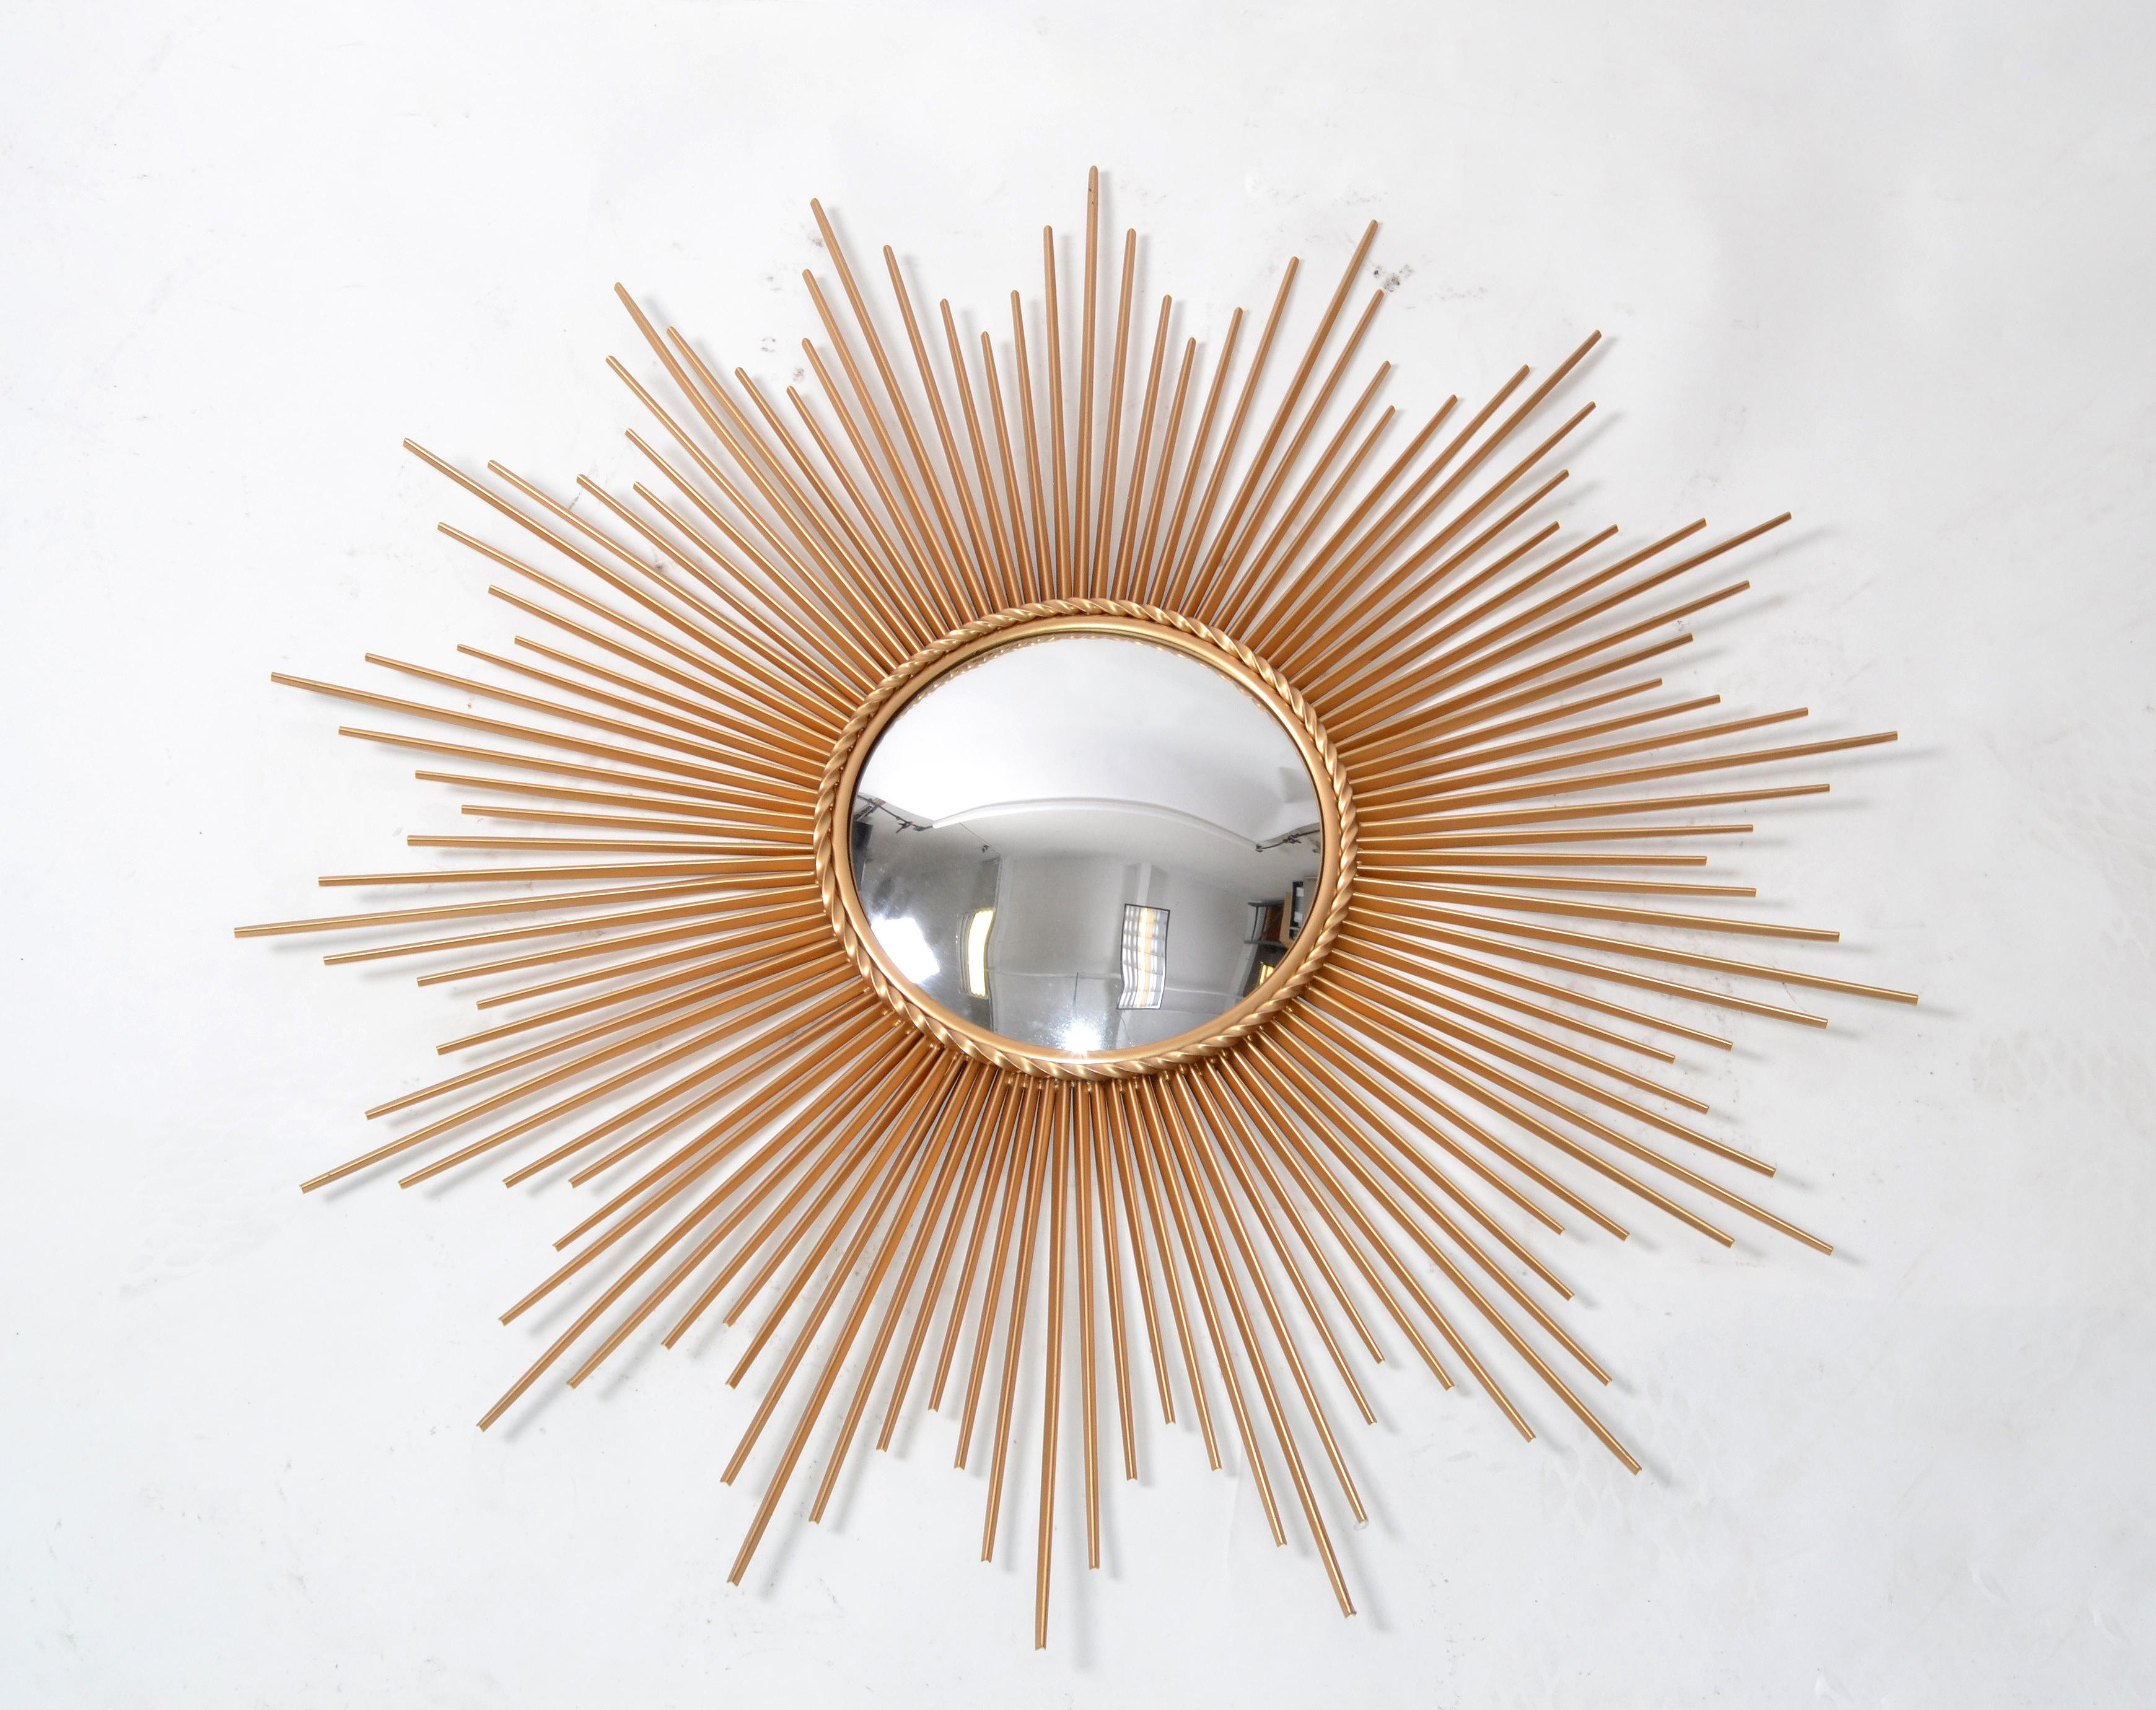 Chaty Vallauris style large 39.5 inches gilt metal sunburst wall mirror, wall art, wall sculpture with convex mirror.
Diameter of mirror is 10.5 inches.
Mid-Century Modern design ready for a new Home.